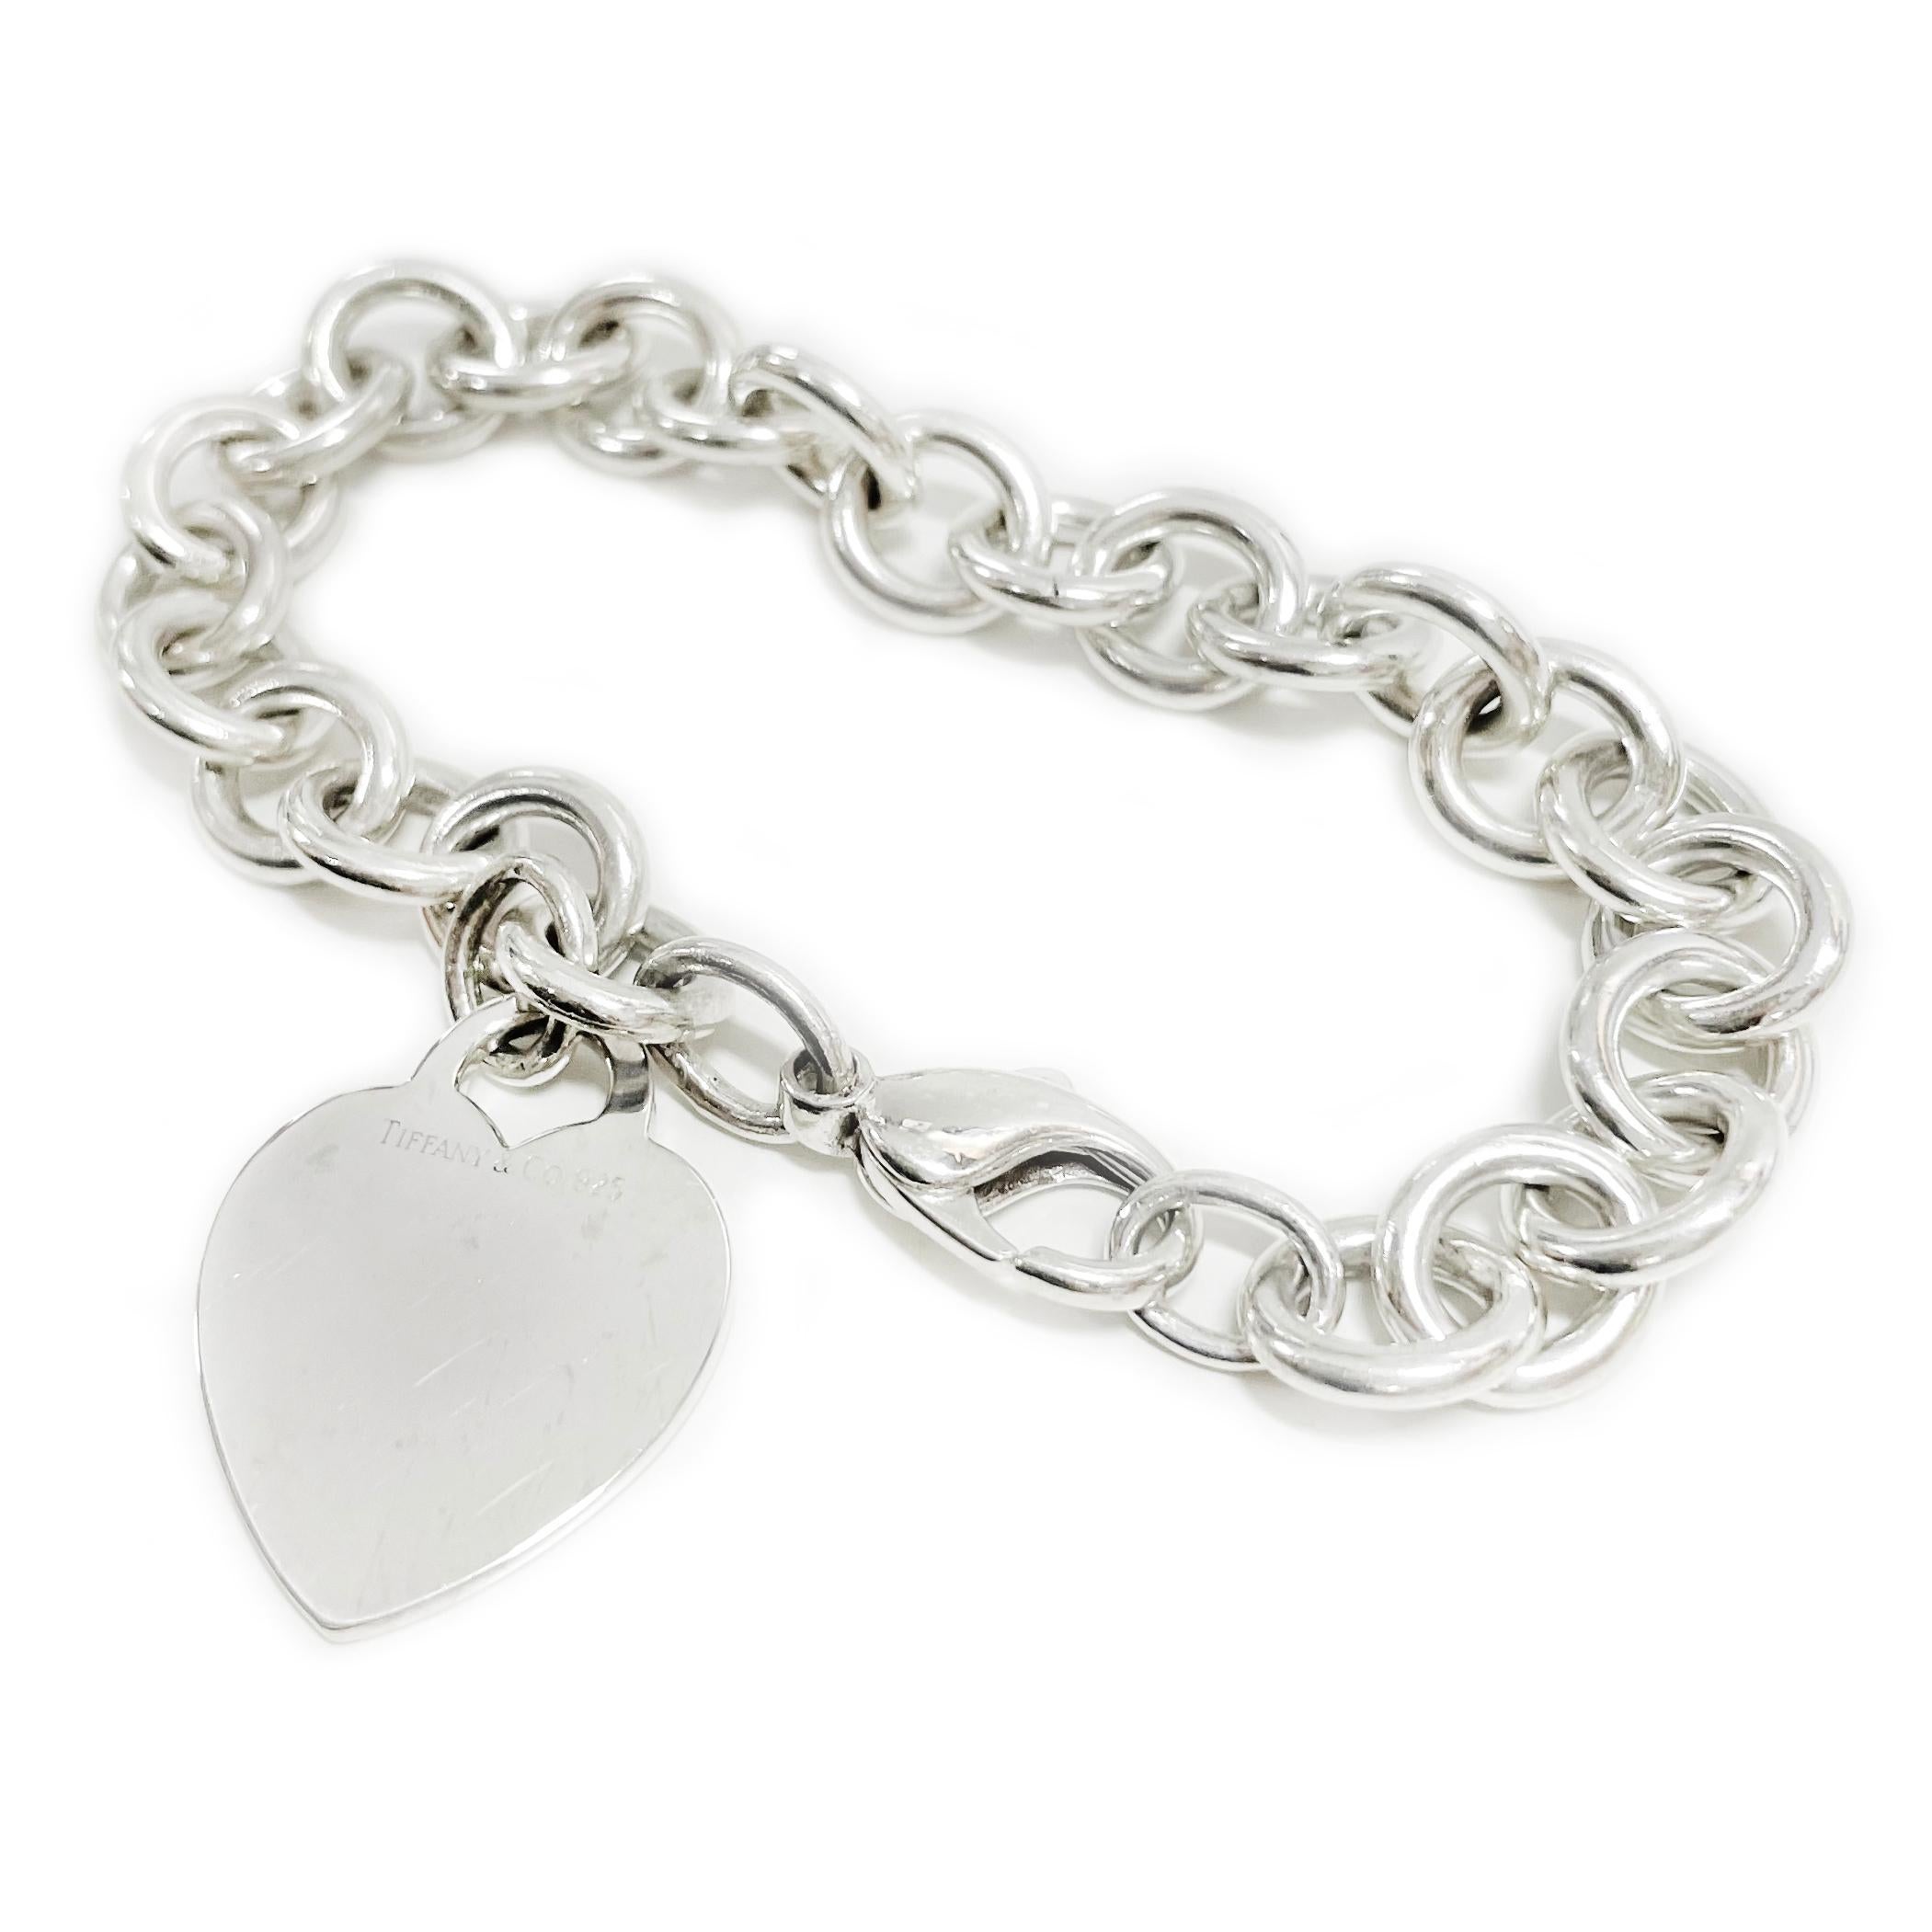 Tiffany & Co. Sterling Silver Heart Bracelet. The bracelet features a heavyweight link chain with a signature Tiffany heart pendant/charm and lobster clasp closure. There are slight surface scuffs but no major scratches. The links measure